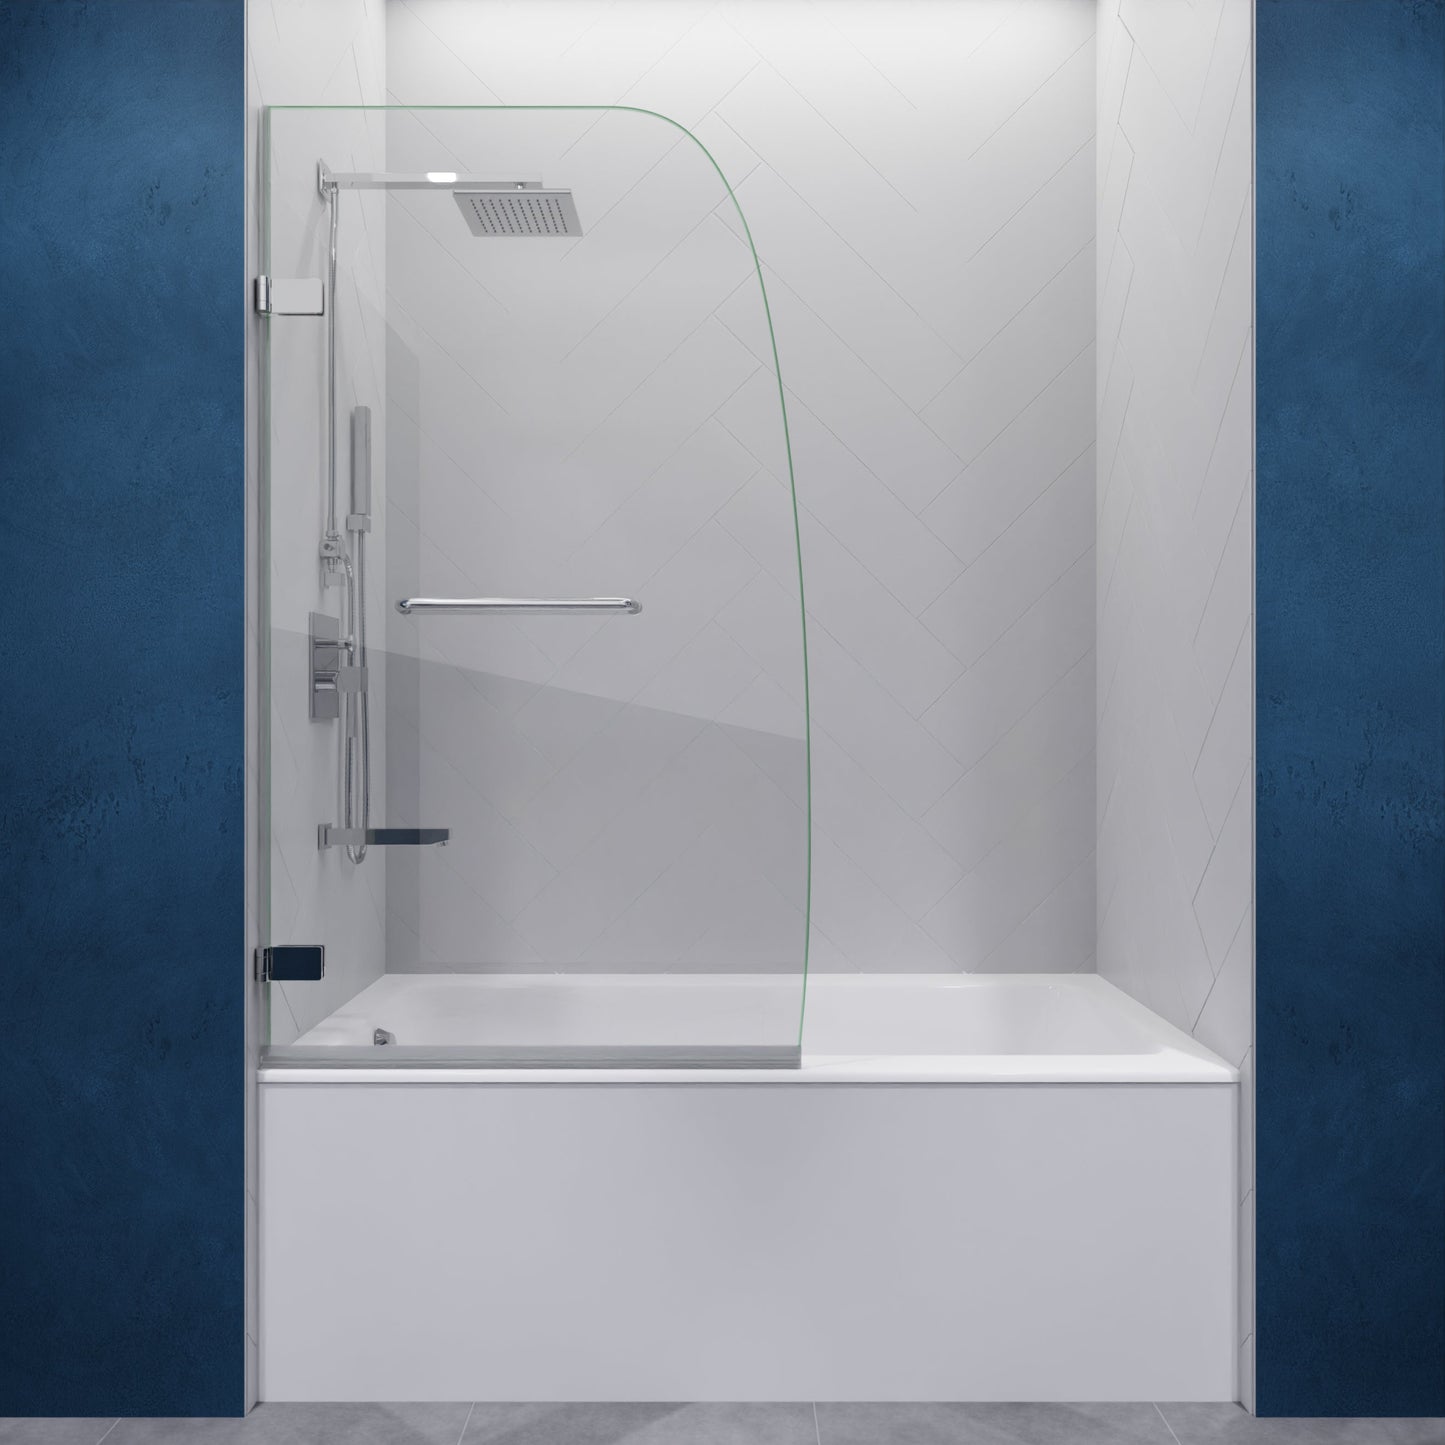 Grand Series 31.5 in. by 56 in. Frameless Hinged Tub Door in Chrome